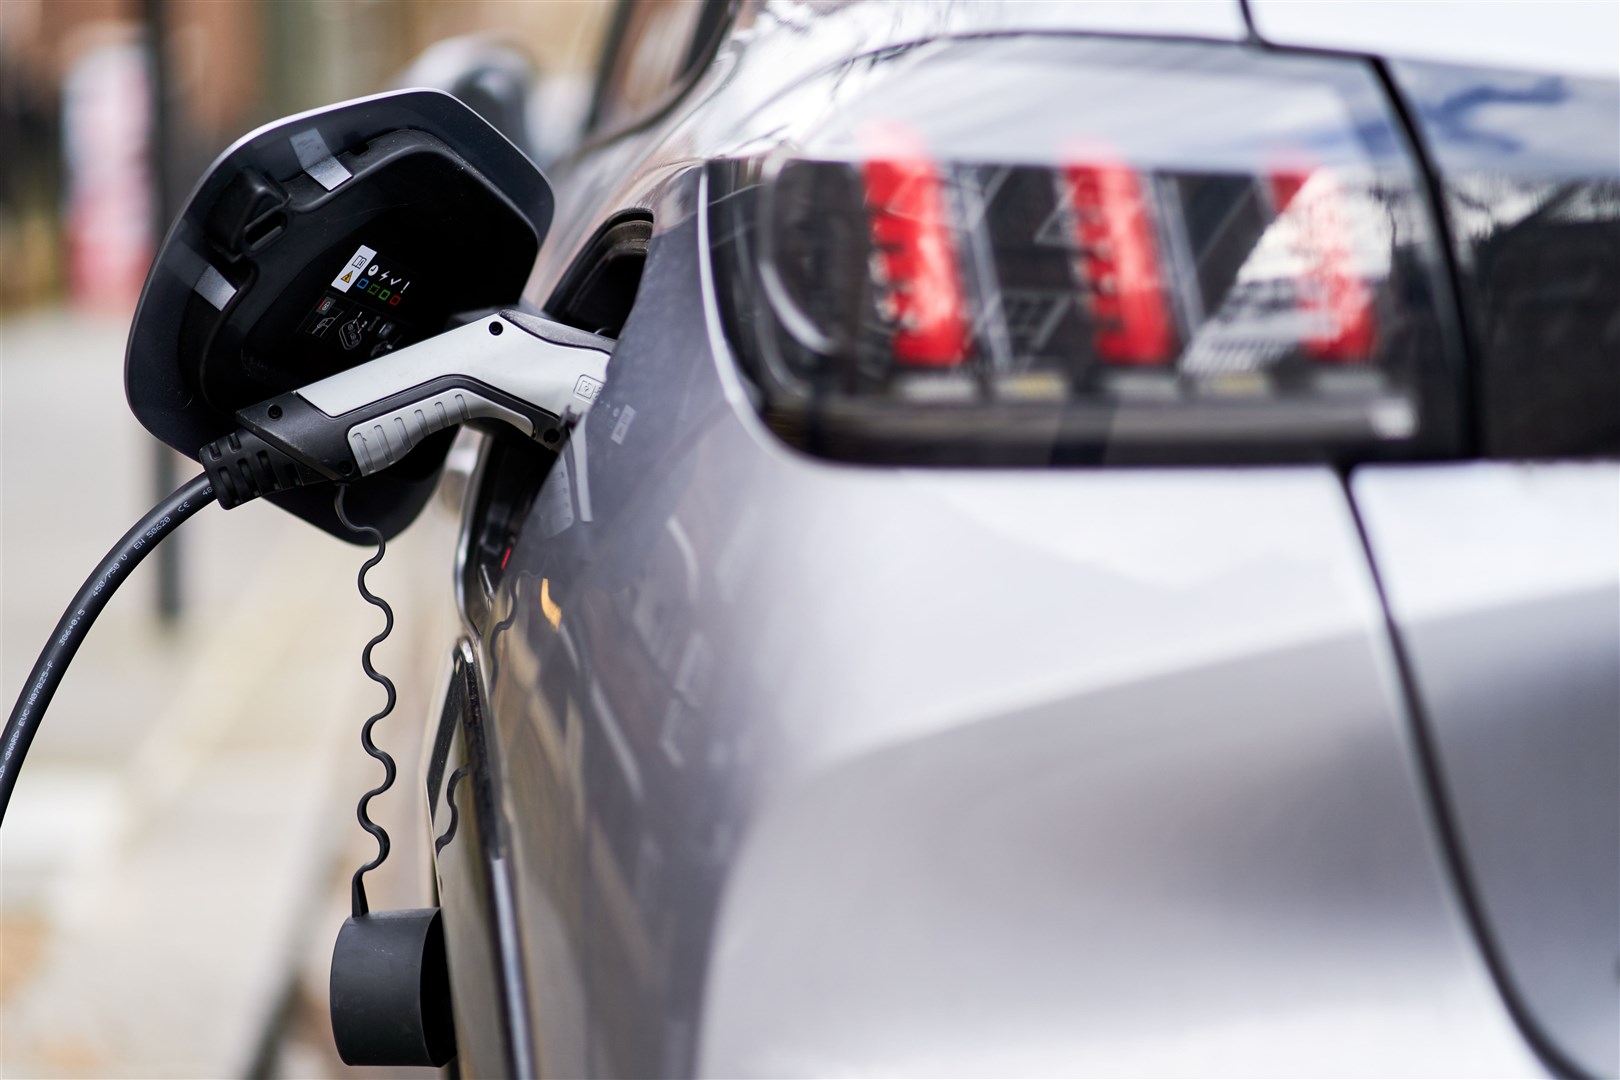 Scottish Tory analysis suggests the Scottish Government will miss its electric car charging station target (John Walton/PA)